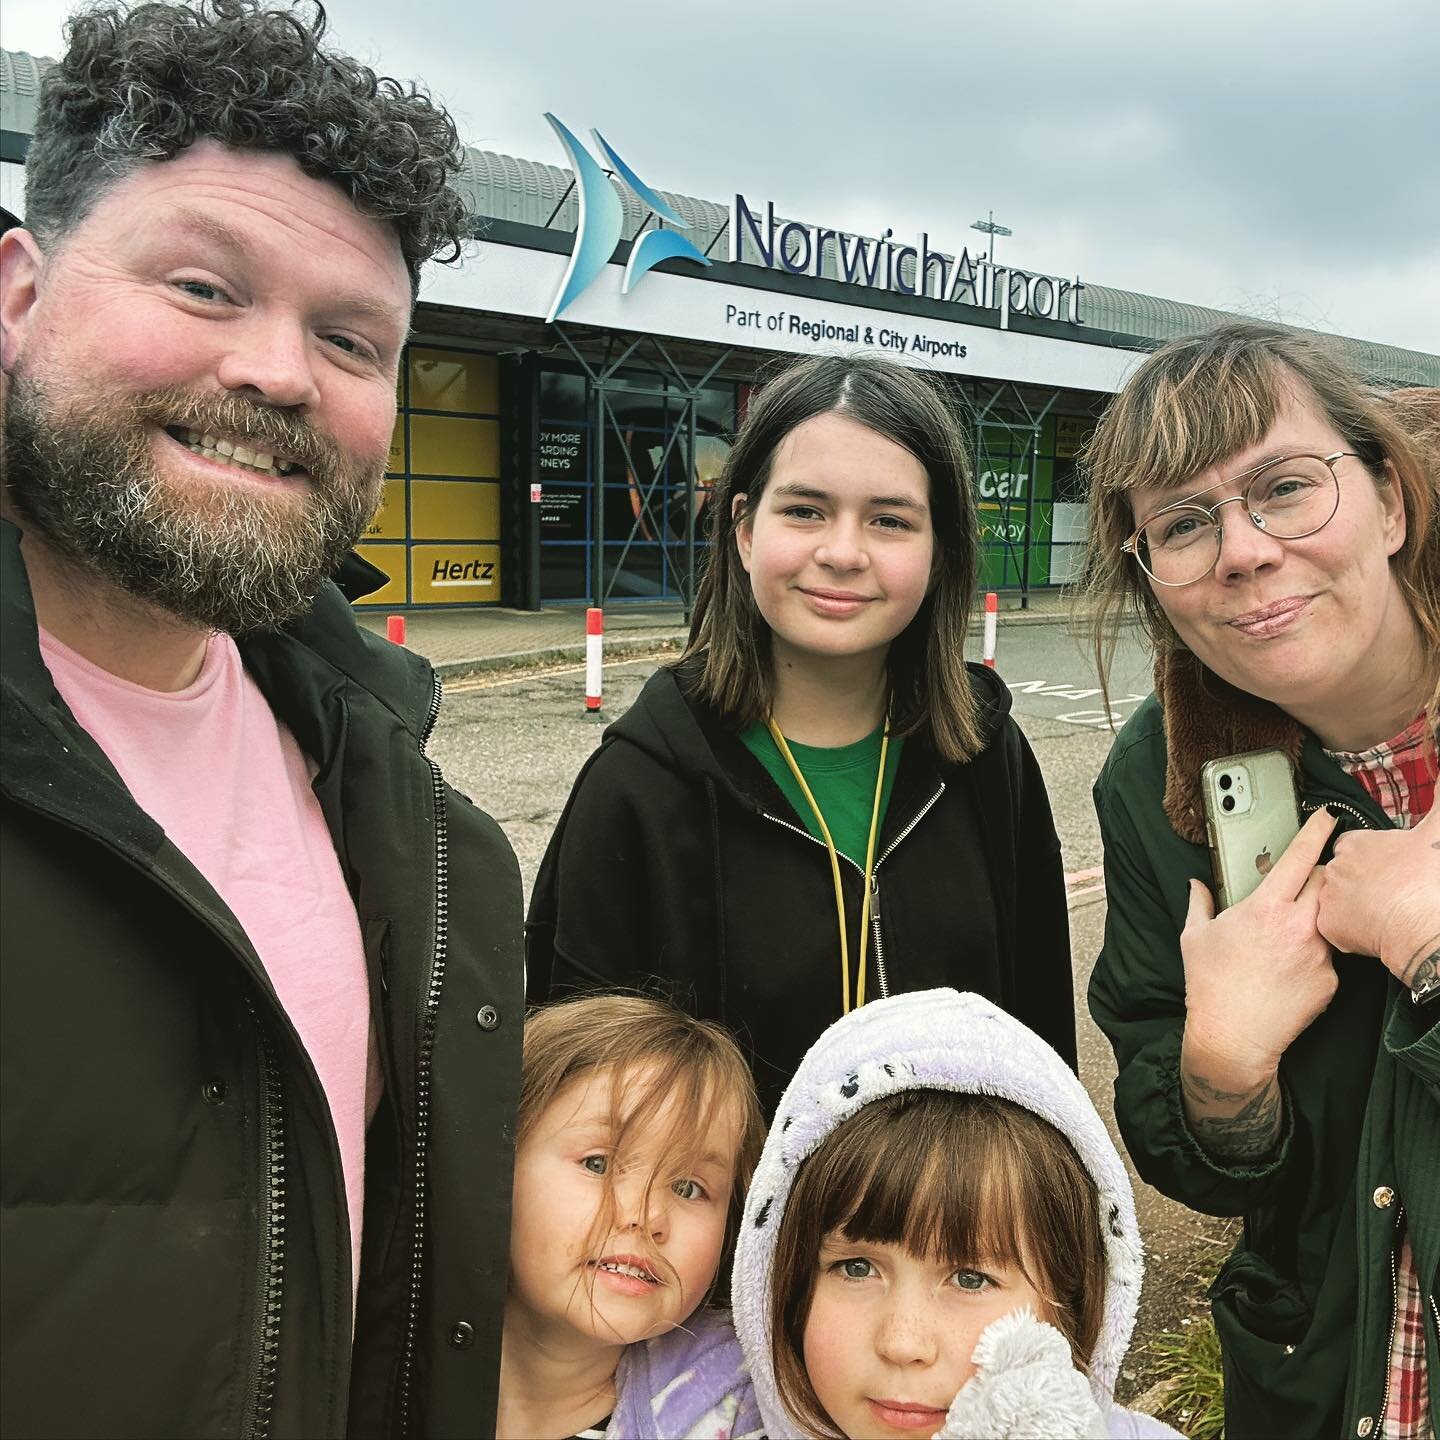 A HUGE thanks to Norwich Airport for letting us come and have a look around tonight as part of their Special Travel Assistance programme. Avalon&rsquo;s autism means she&rsquo;s terrified of unfamiliar things, including planes, airports, hotels, buse